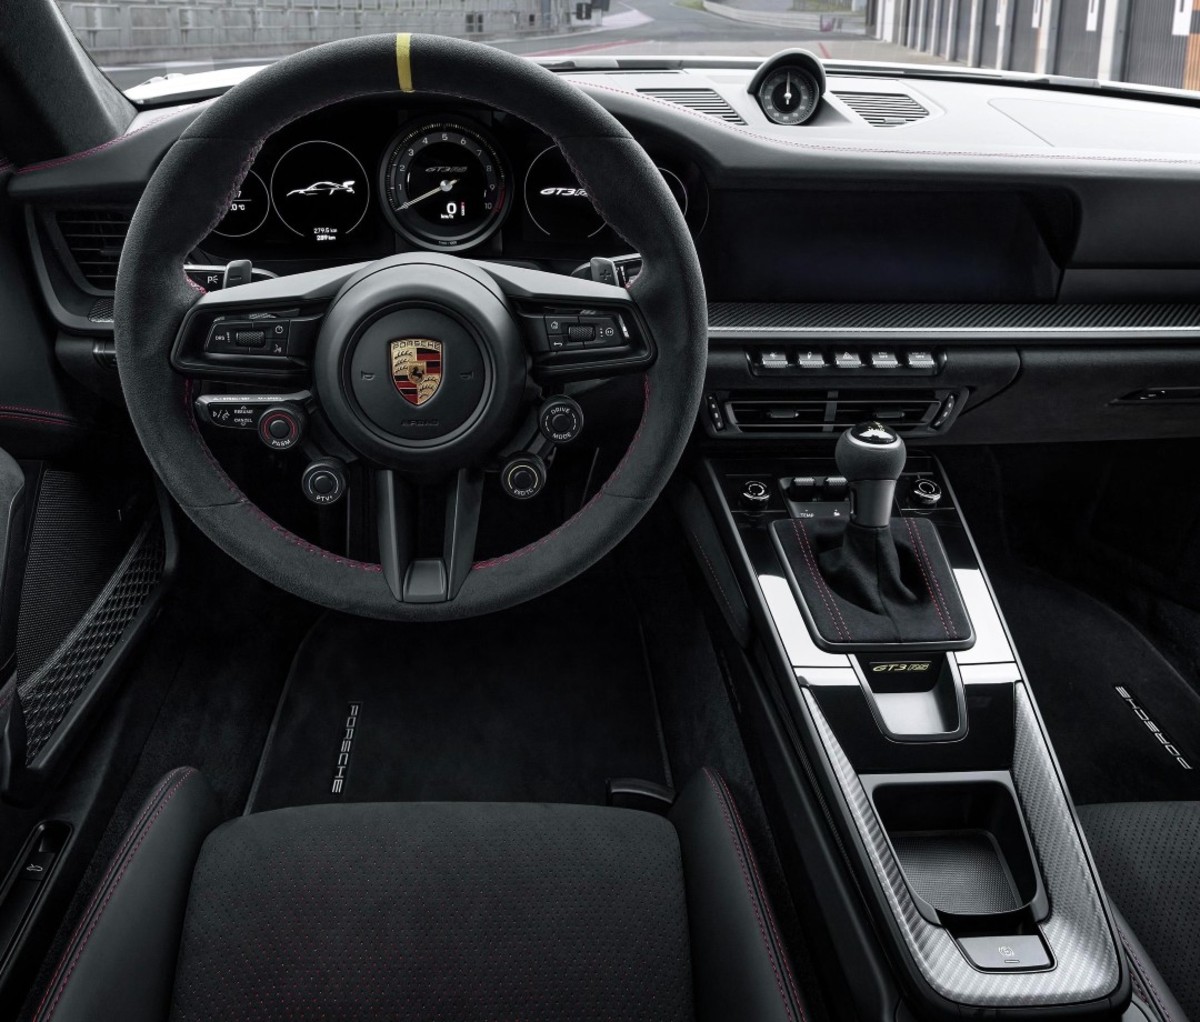 Steering wheel and interior of sports car